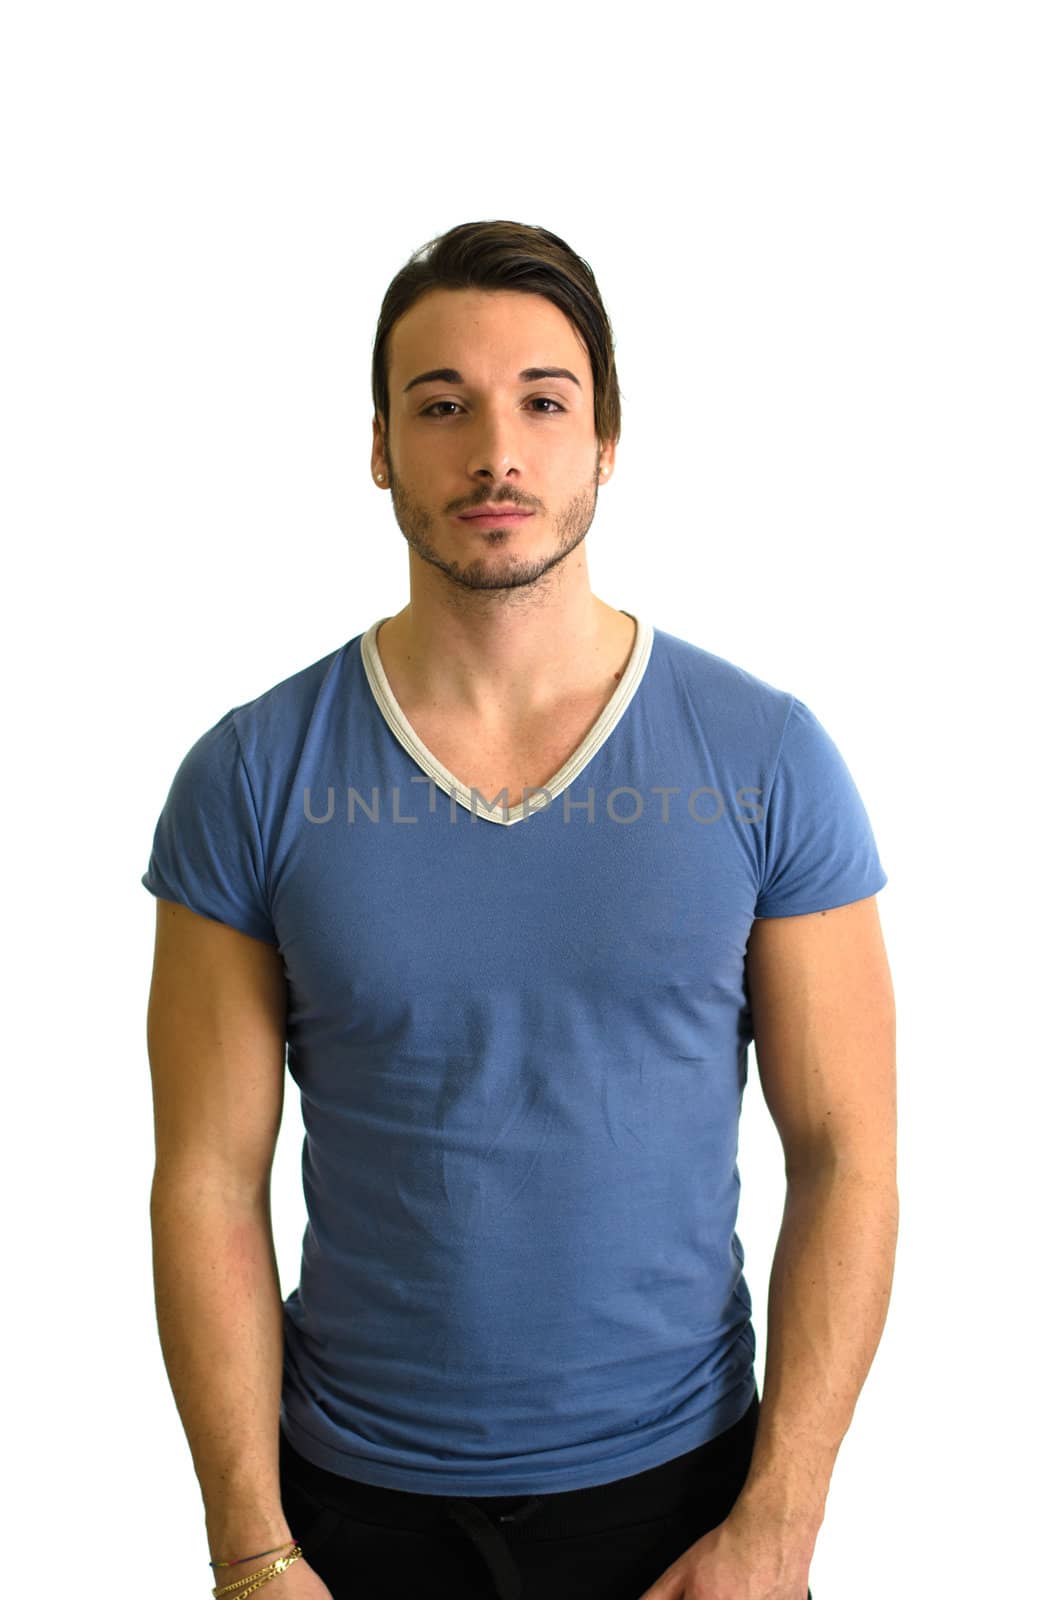 Attractive, muscular guy standing and looking in camera, isolated